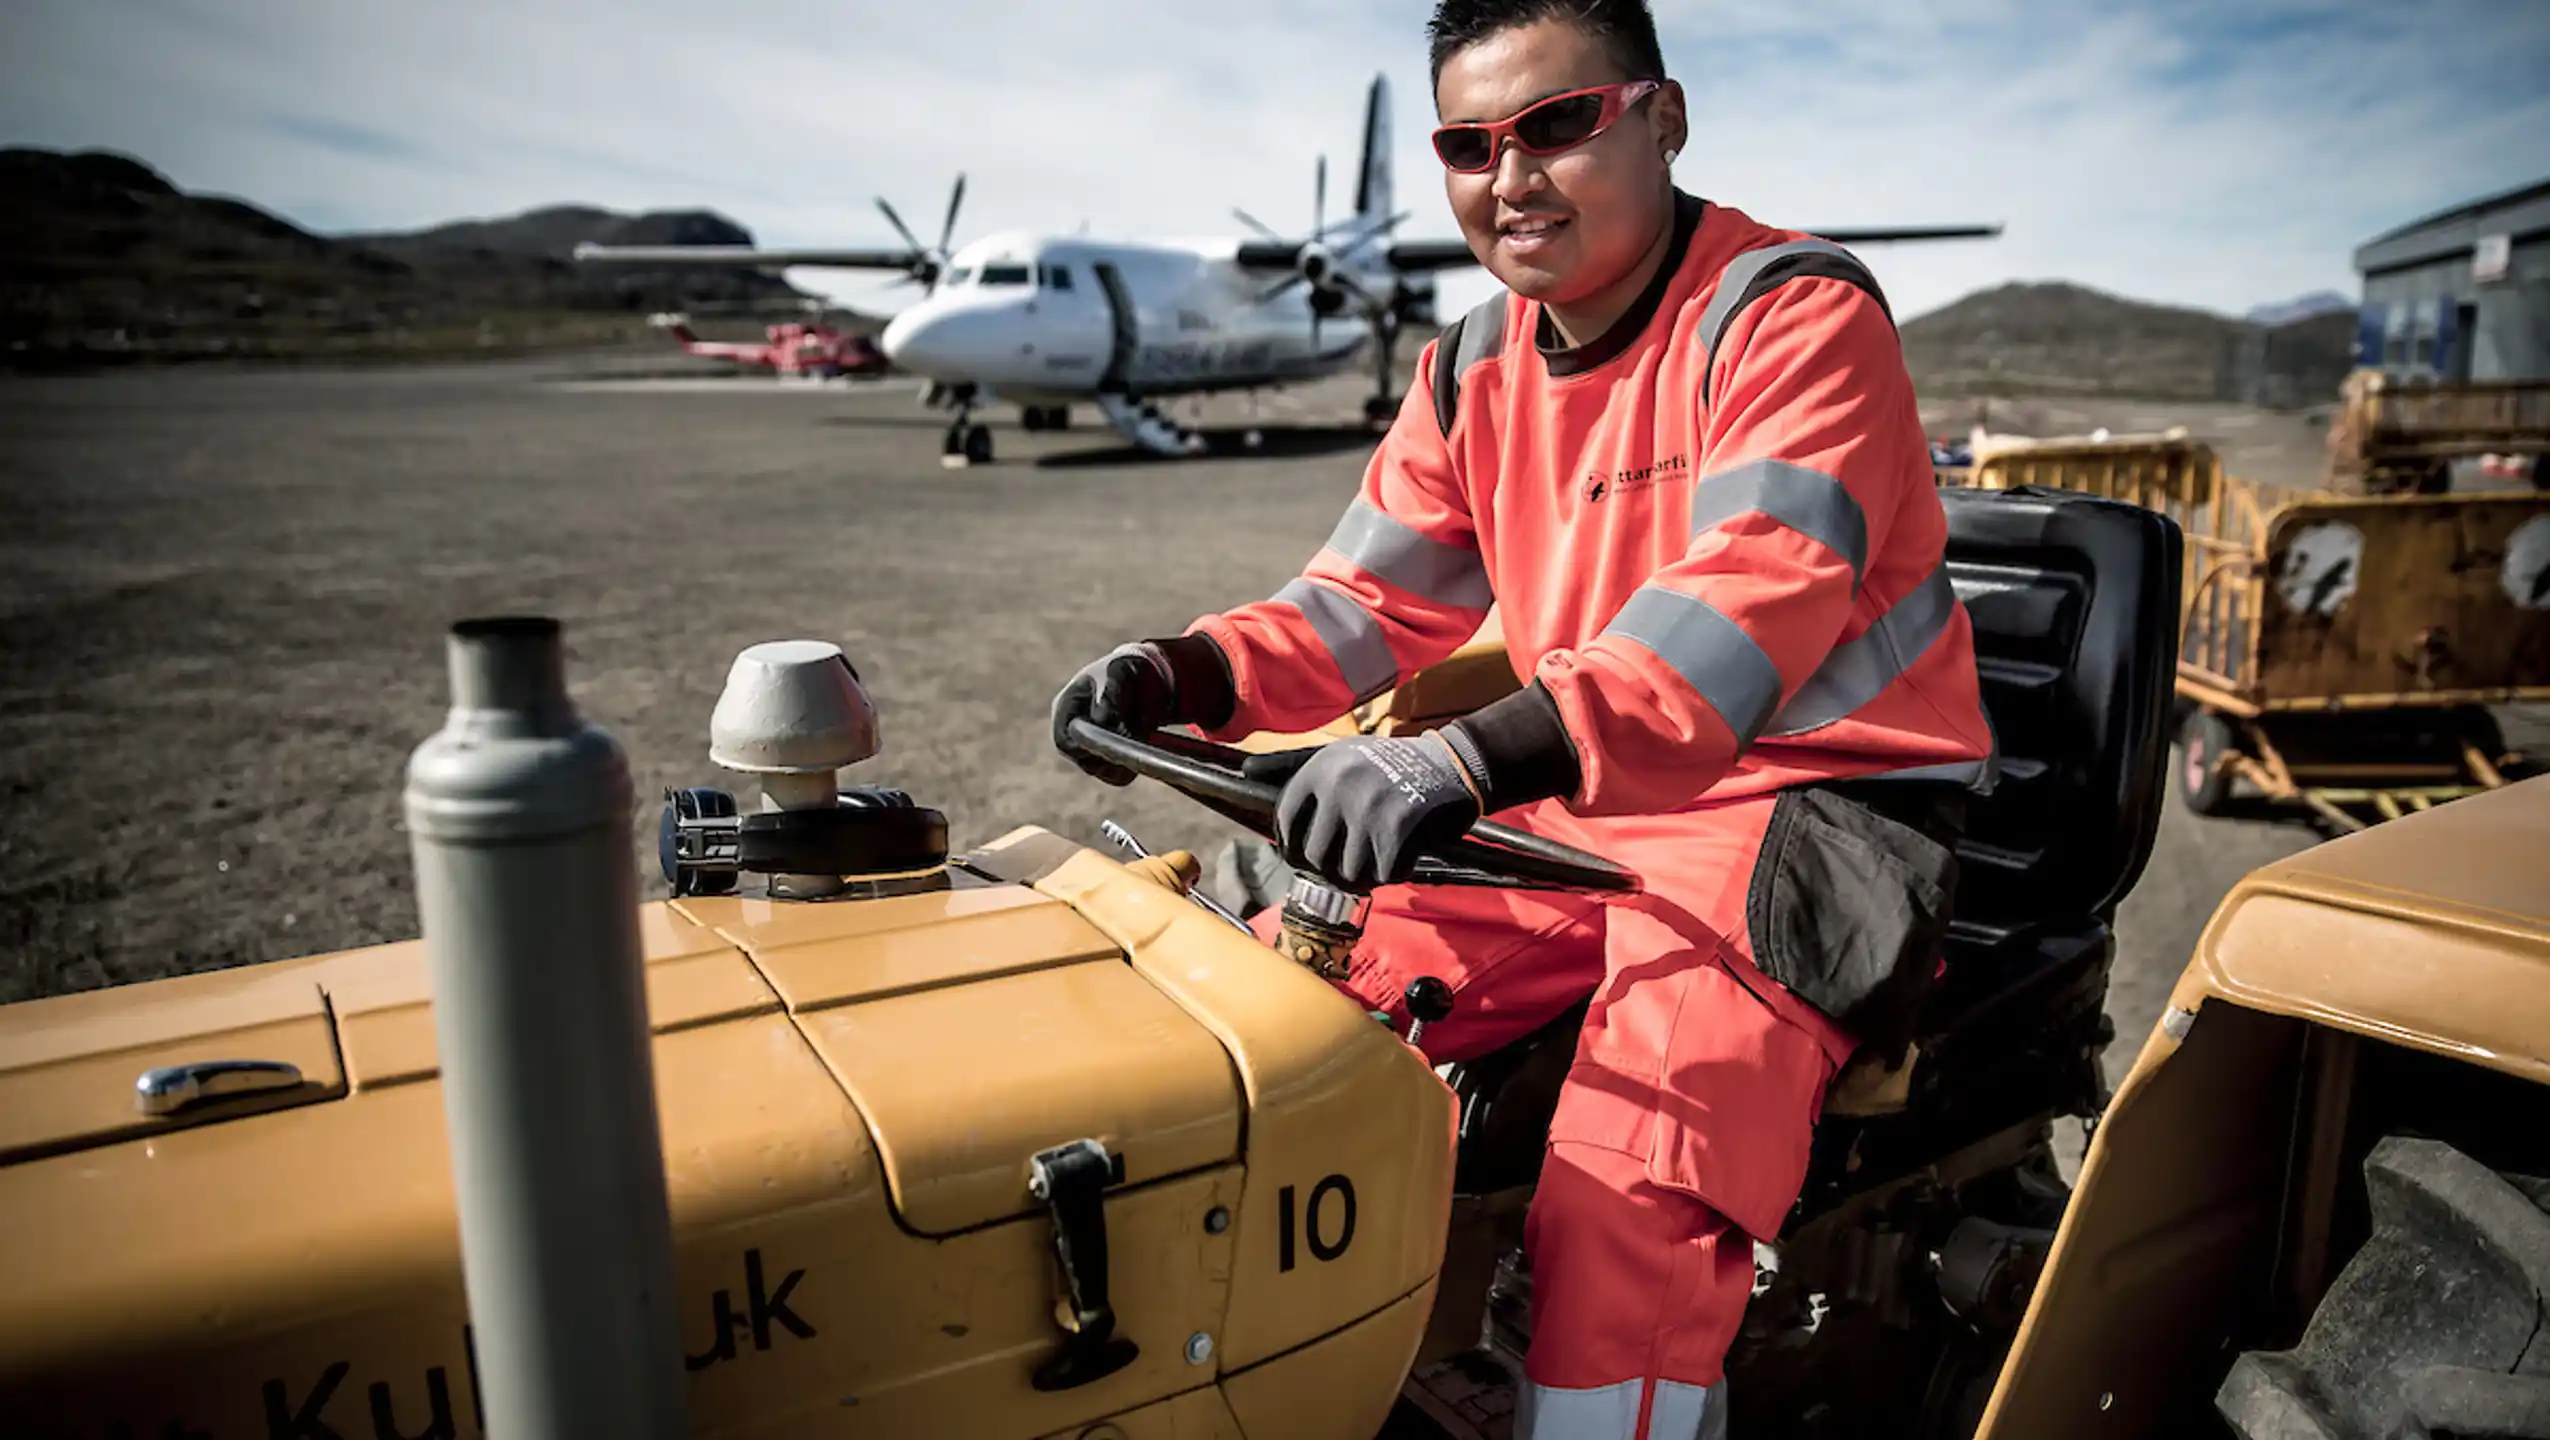 An Airport Worker At Kulusuk Airport In East Greenland With An Air Iceland Plane In The Background